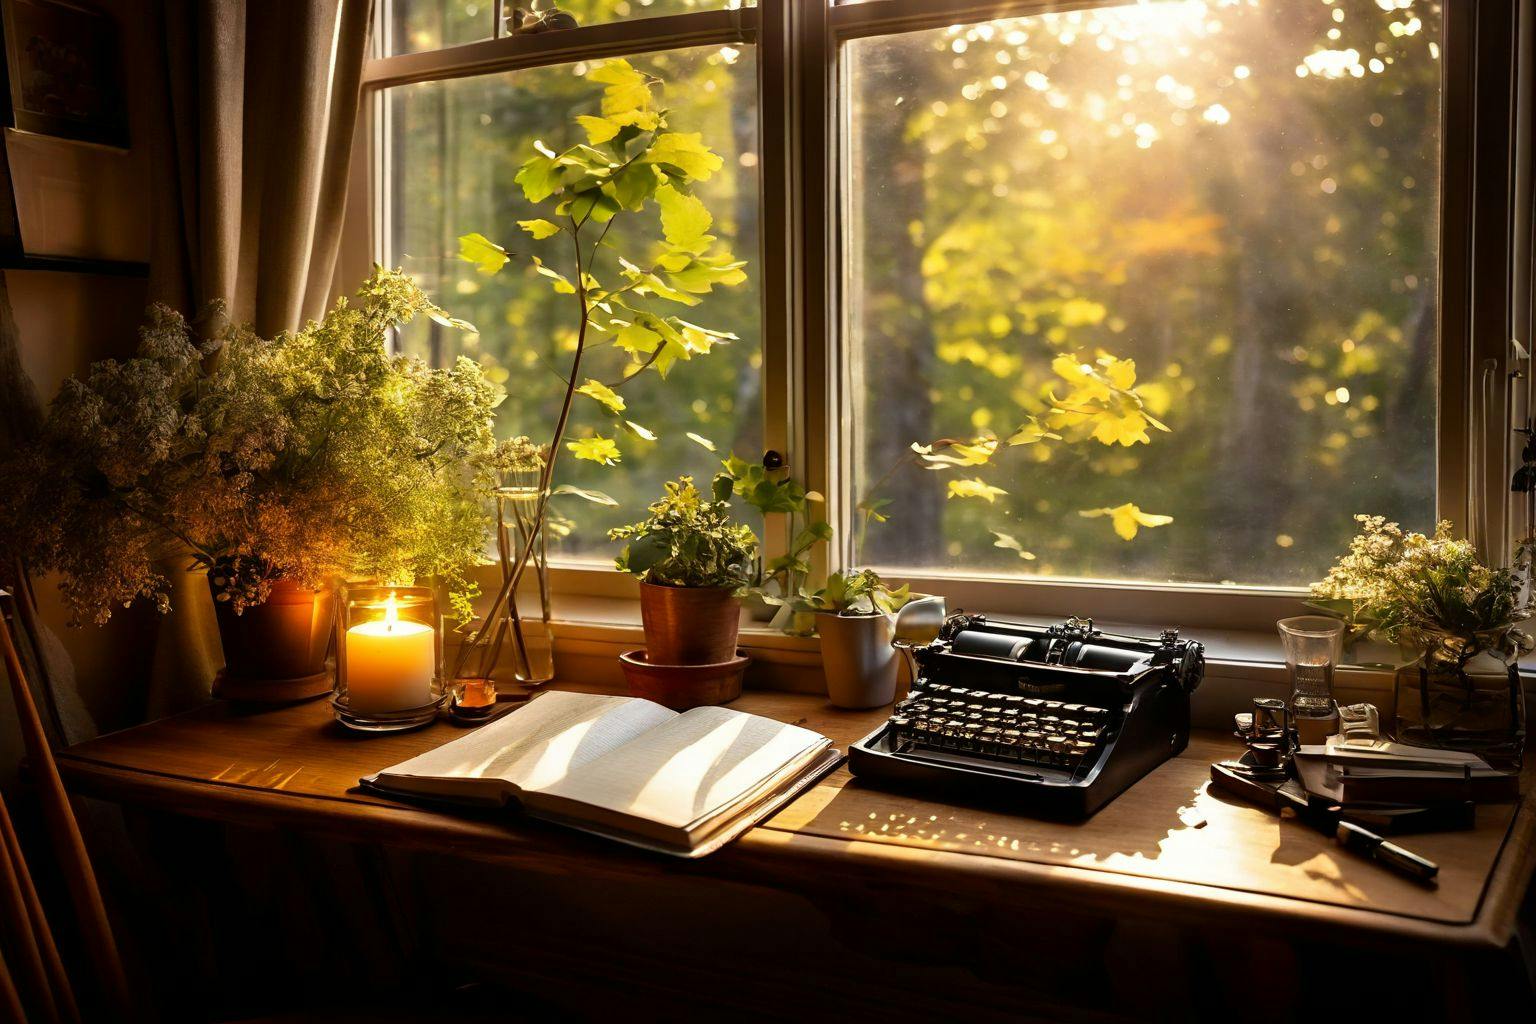 Cozy, well-lit corner with a comfortable chair, a small table with a notebook and pen, suggesting a personal, introspective writing space, Photography capturing warmth and comfort inviting storytelling.